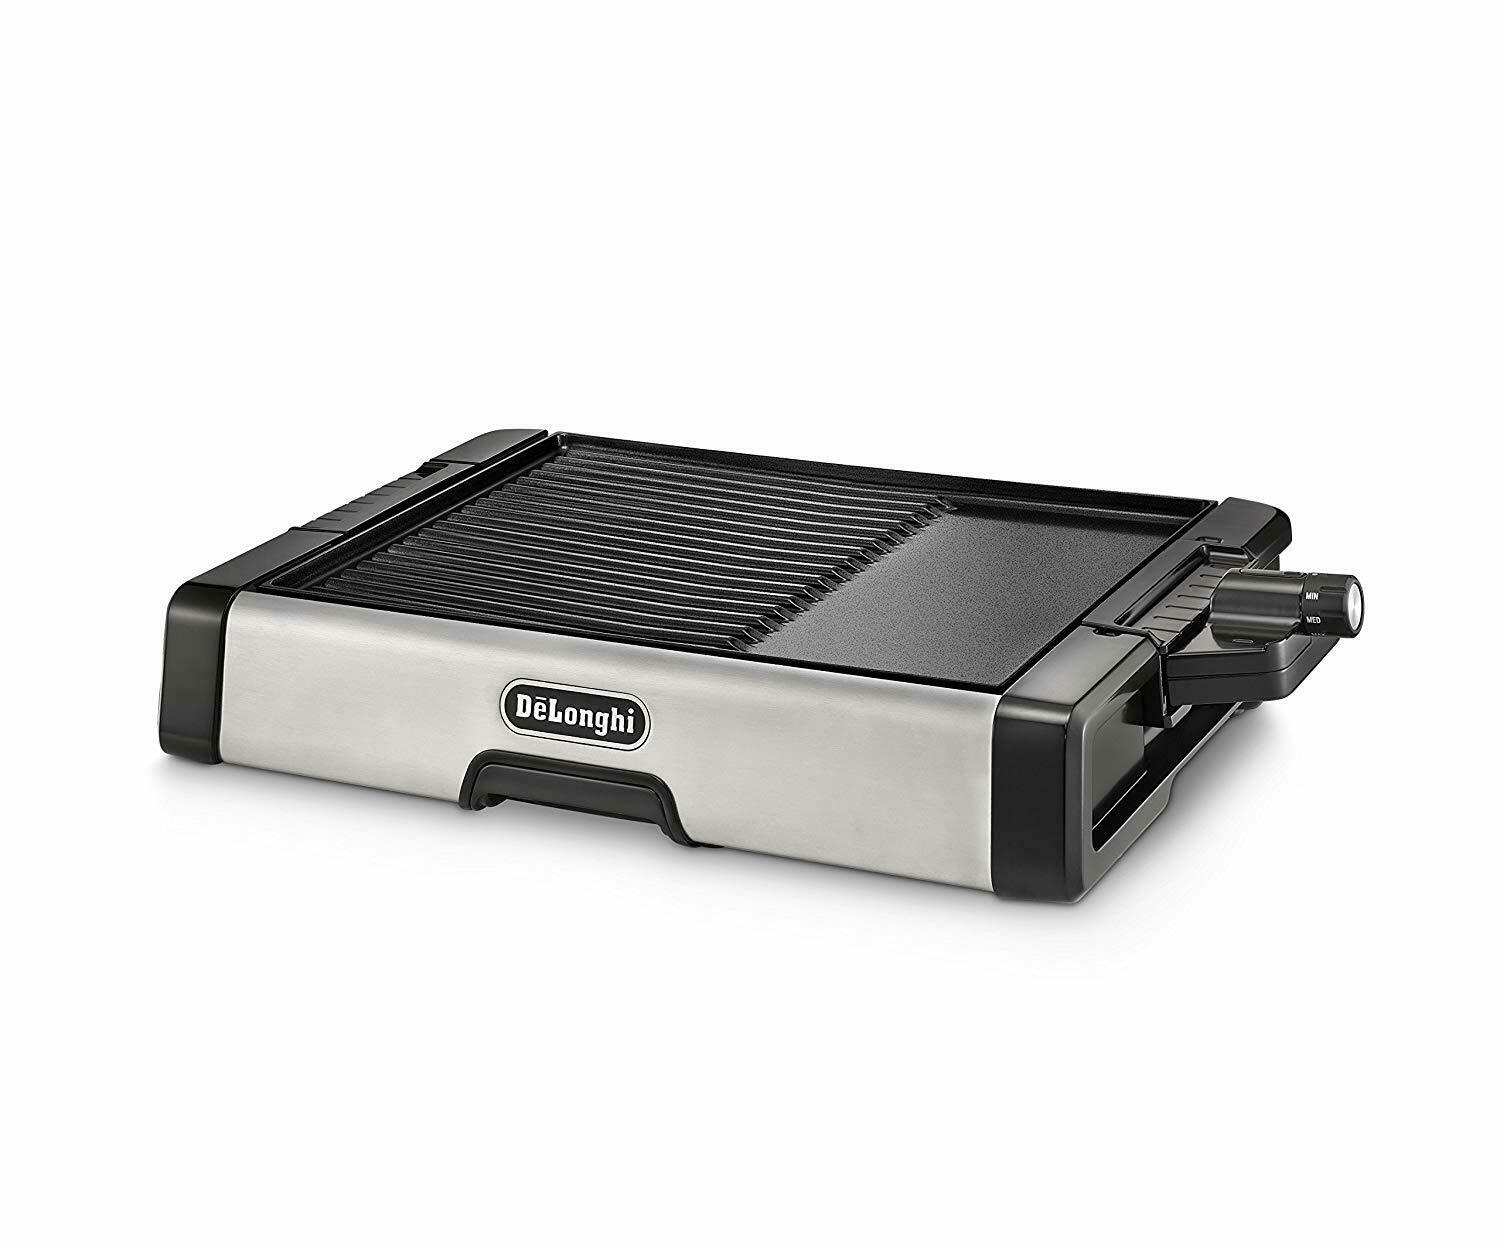 Delonghi BG500C 220 Volt Grill & Griddle with Temp Control For Export Overseas Use Only